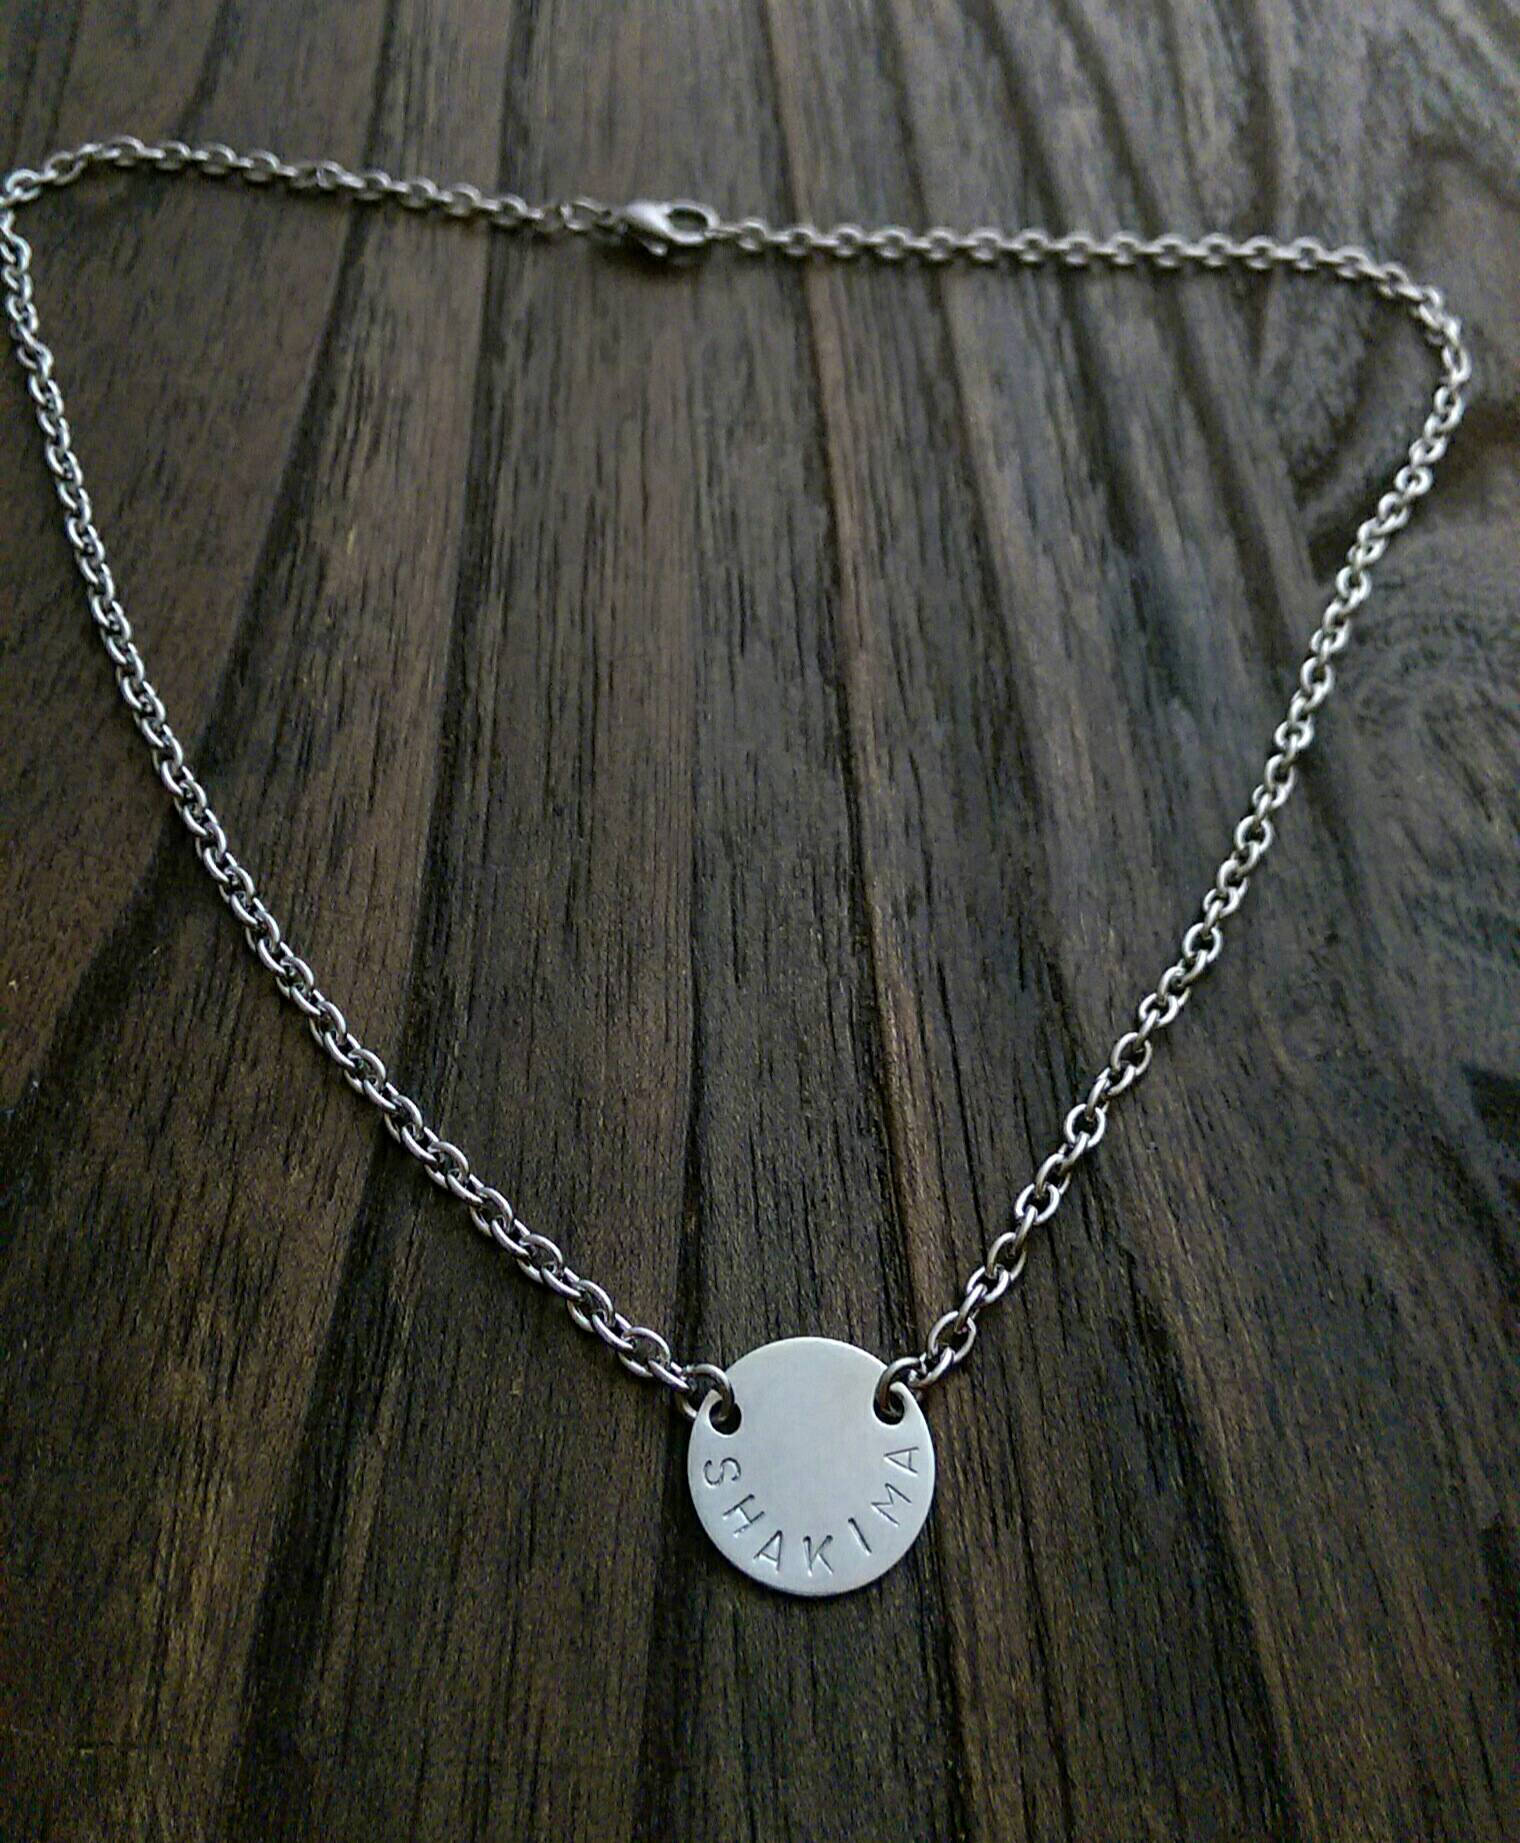 Personalised Hand Stamped Circle 15mm Disc Necklace Pendant Stainless Steel. - Silver and Resin Designs